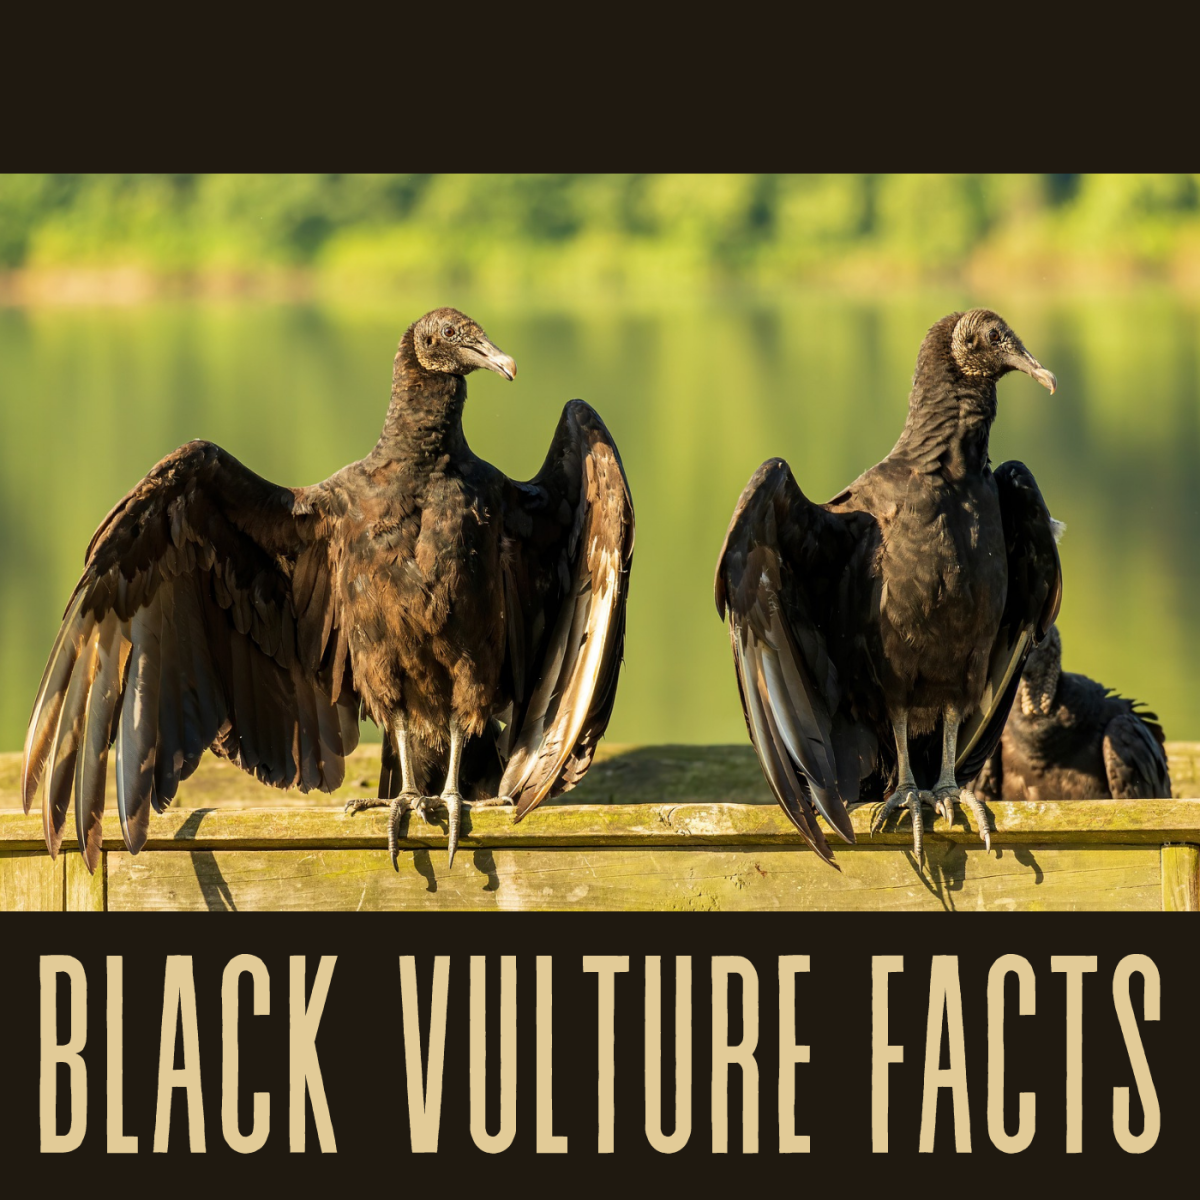 American black vultures are gregarious and love to roost in groups. They feed as a group and will try to drive away more solitary animals, such as turkey vultures.